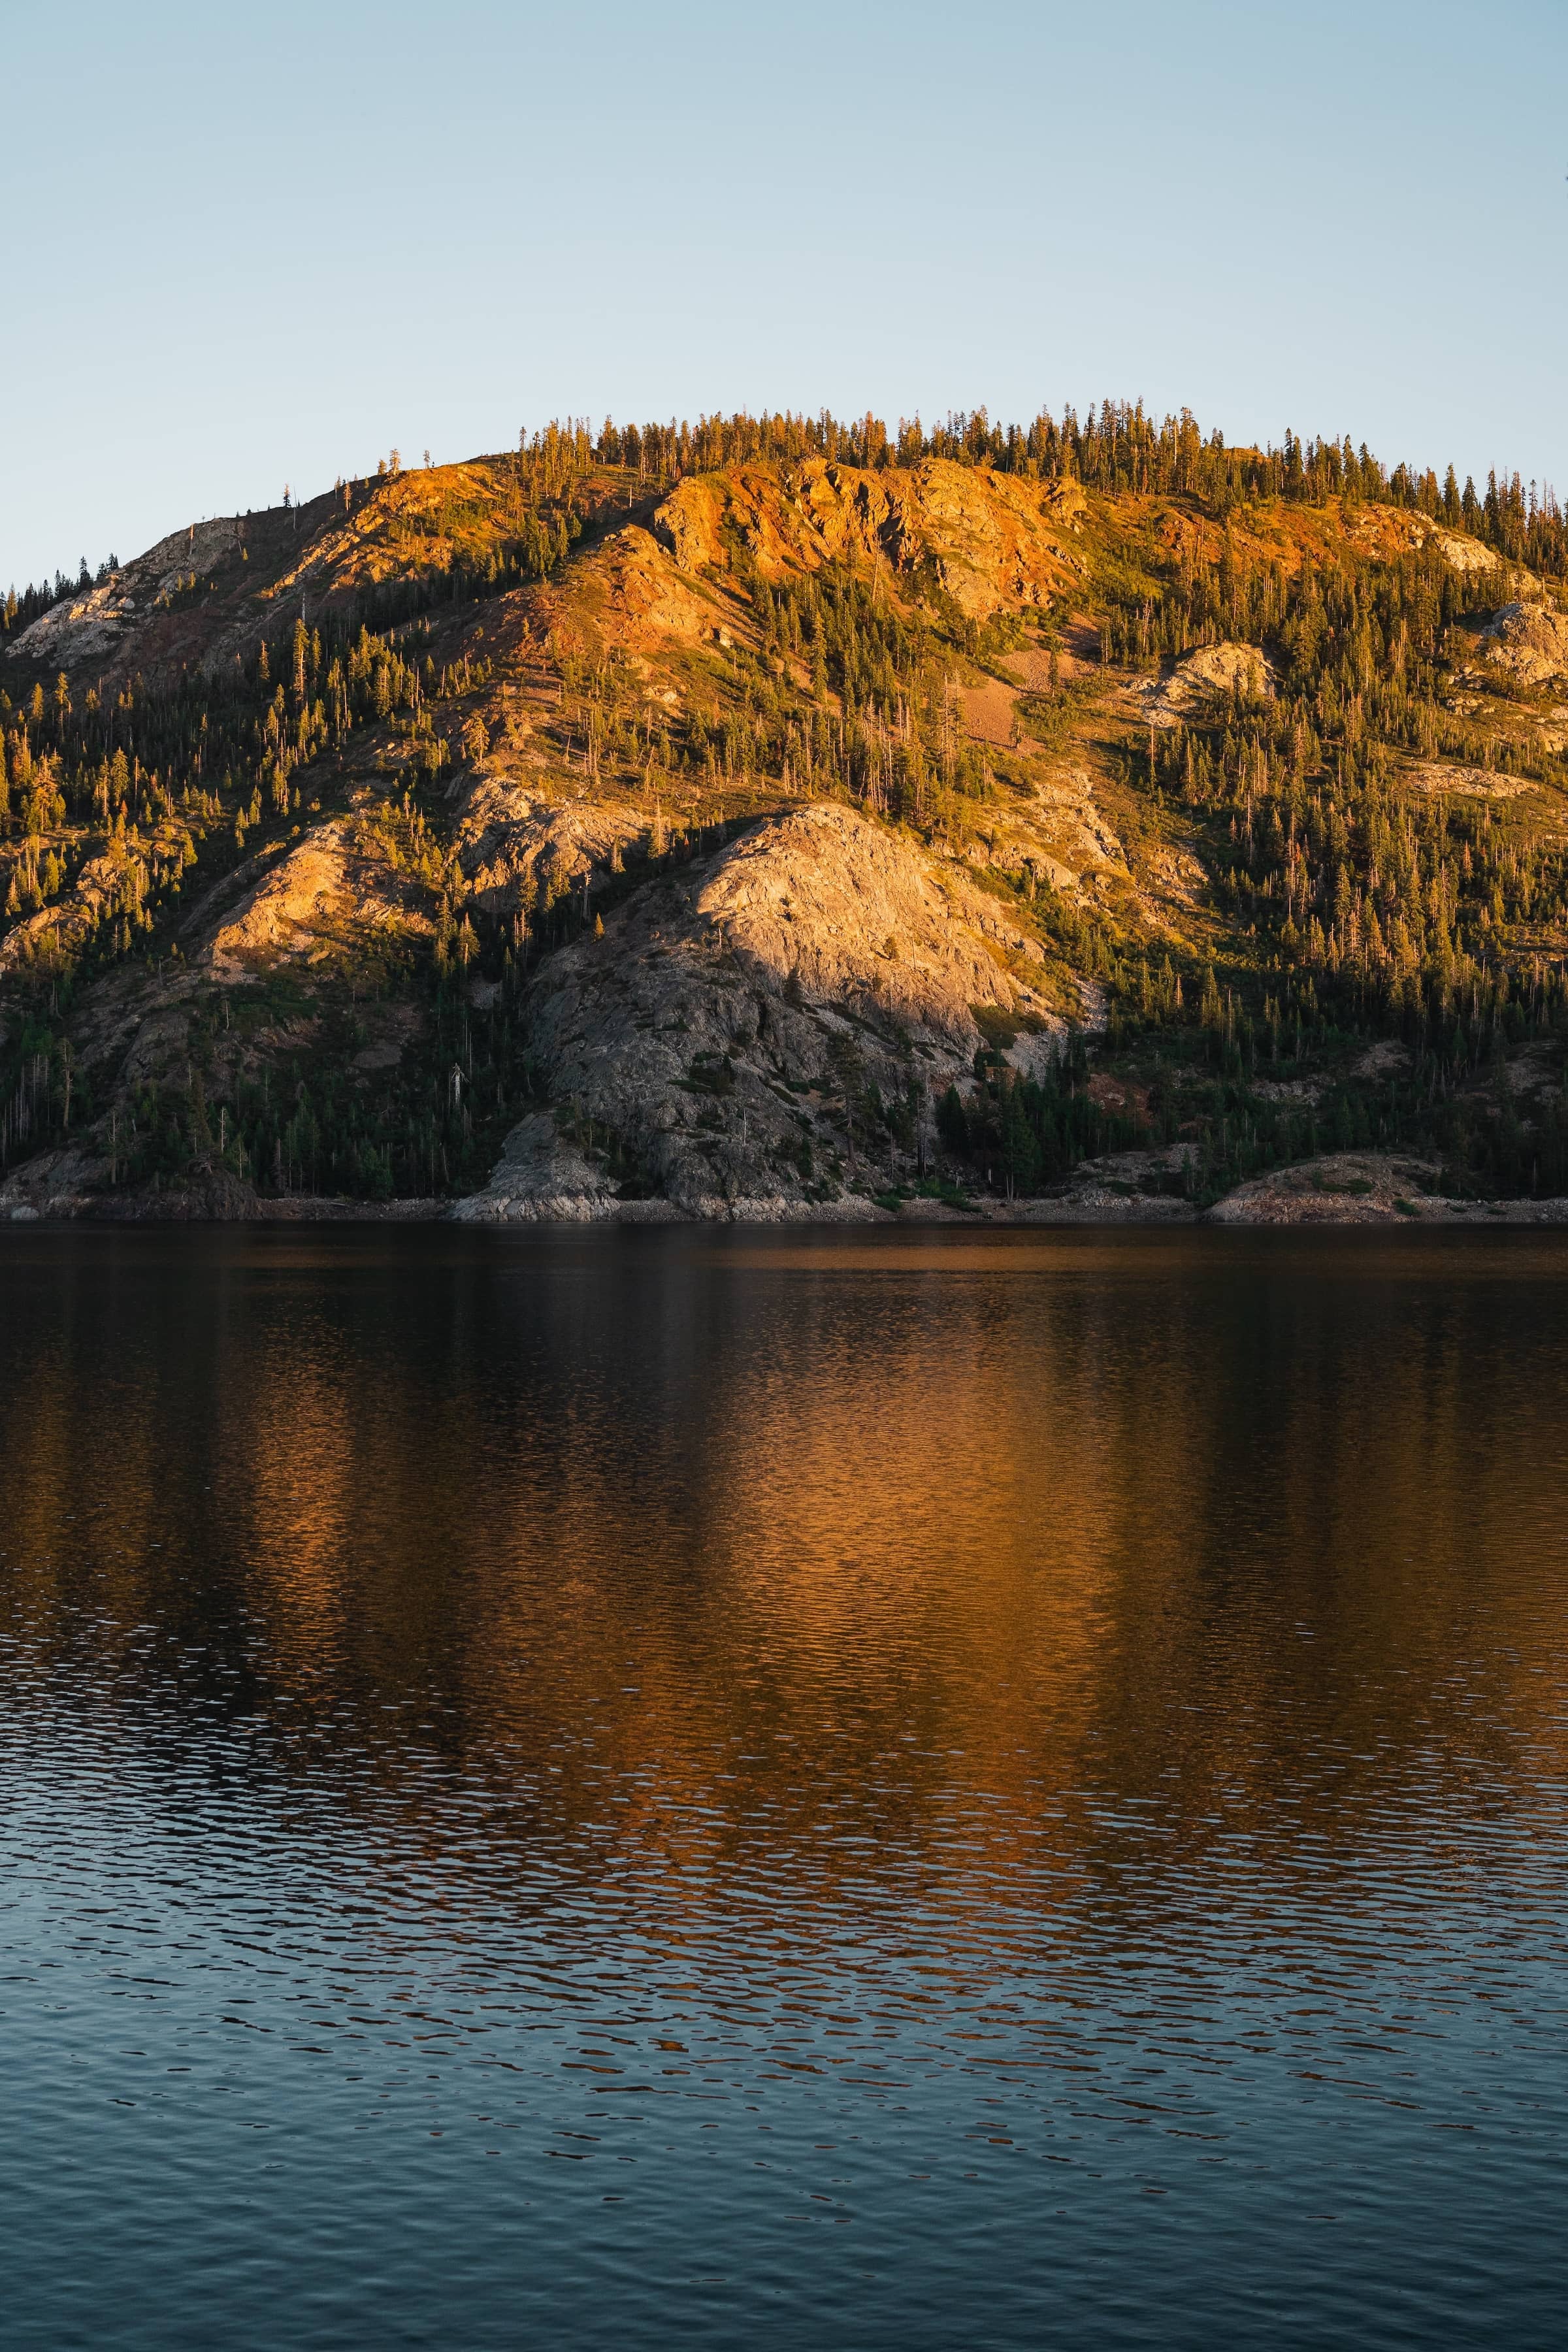 A vertical shot of the lake and mountains across the water on the shore showing majesty in the late evening light.